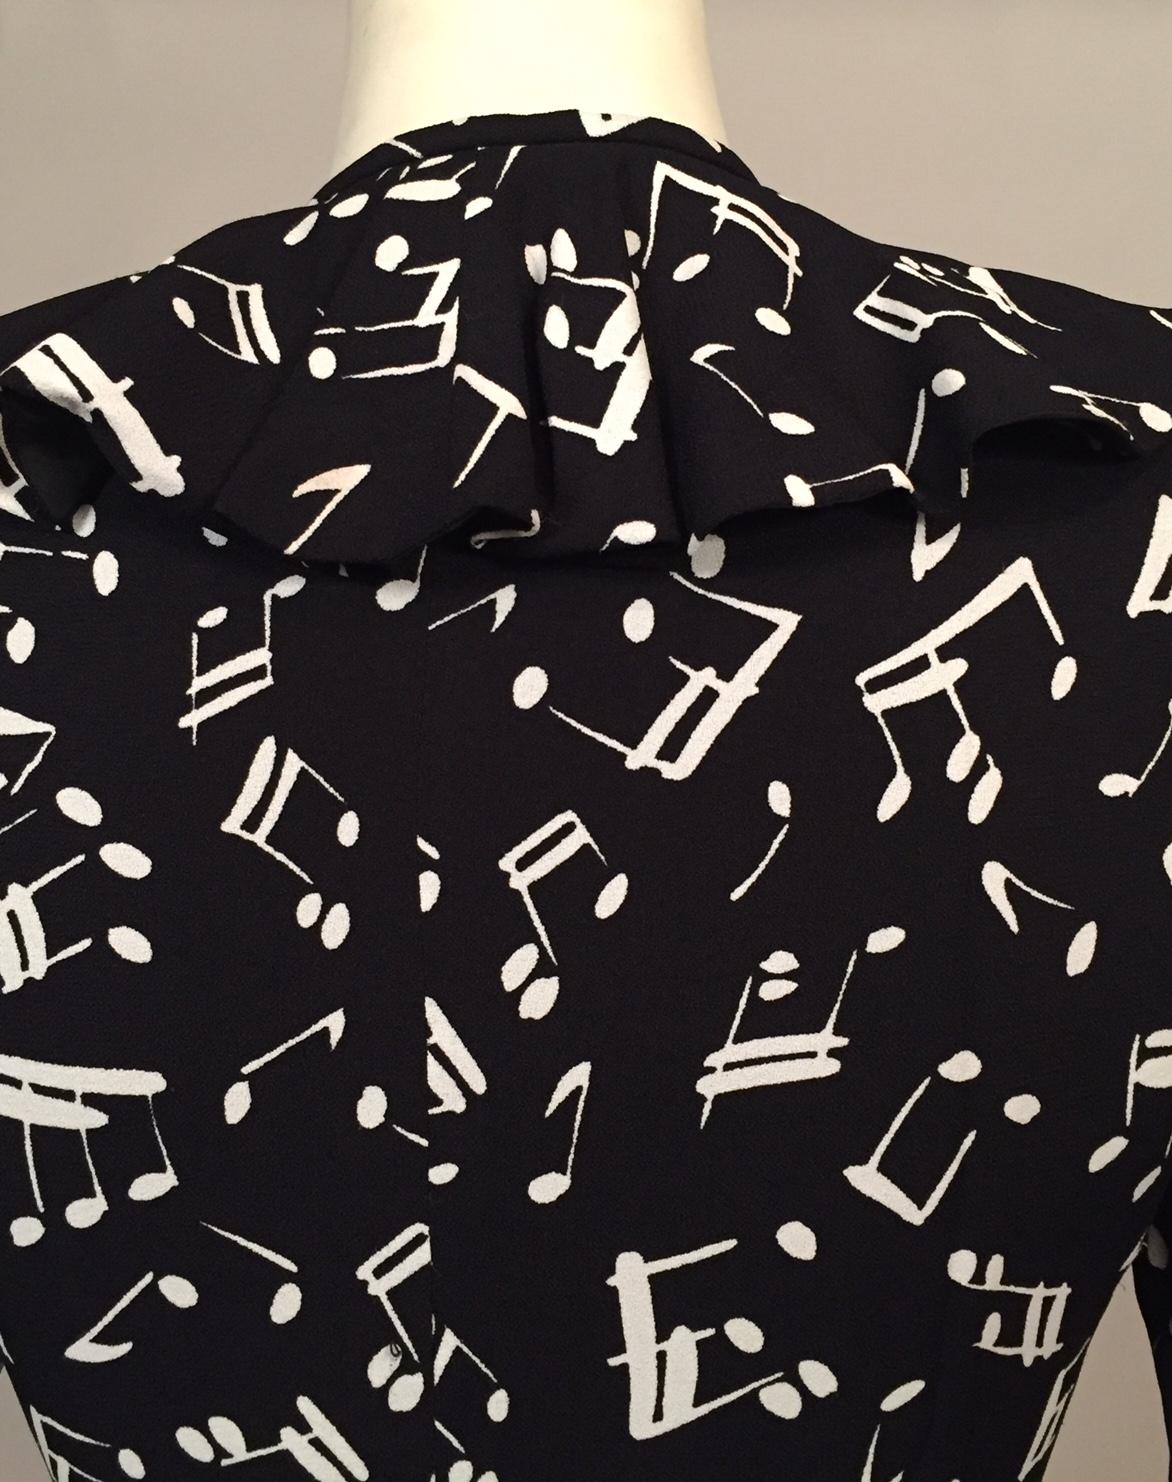 Yves Saint Laurent Two Piece Dress Music Notes Black and White Print 2